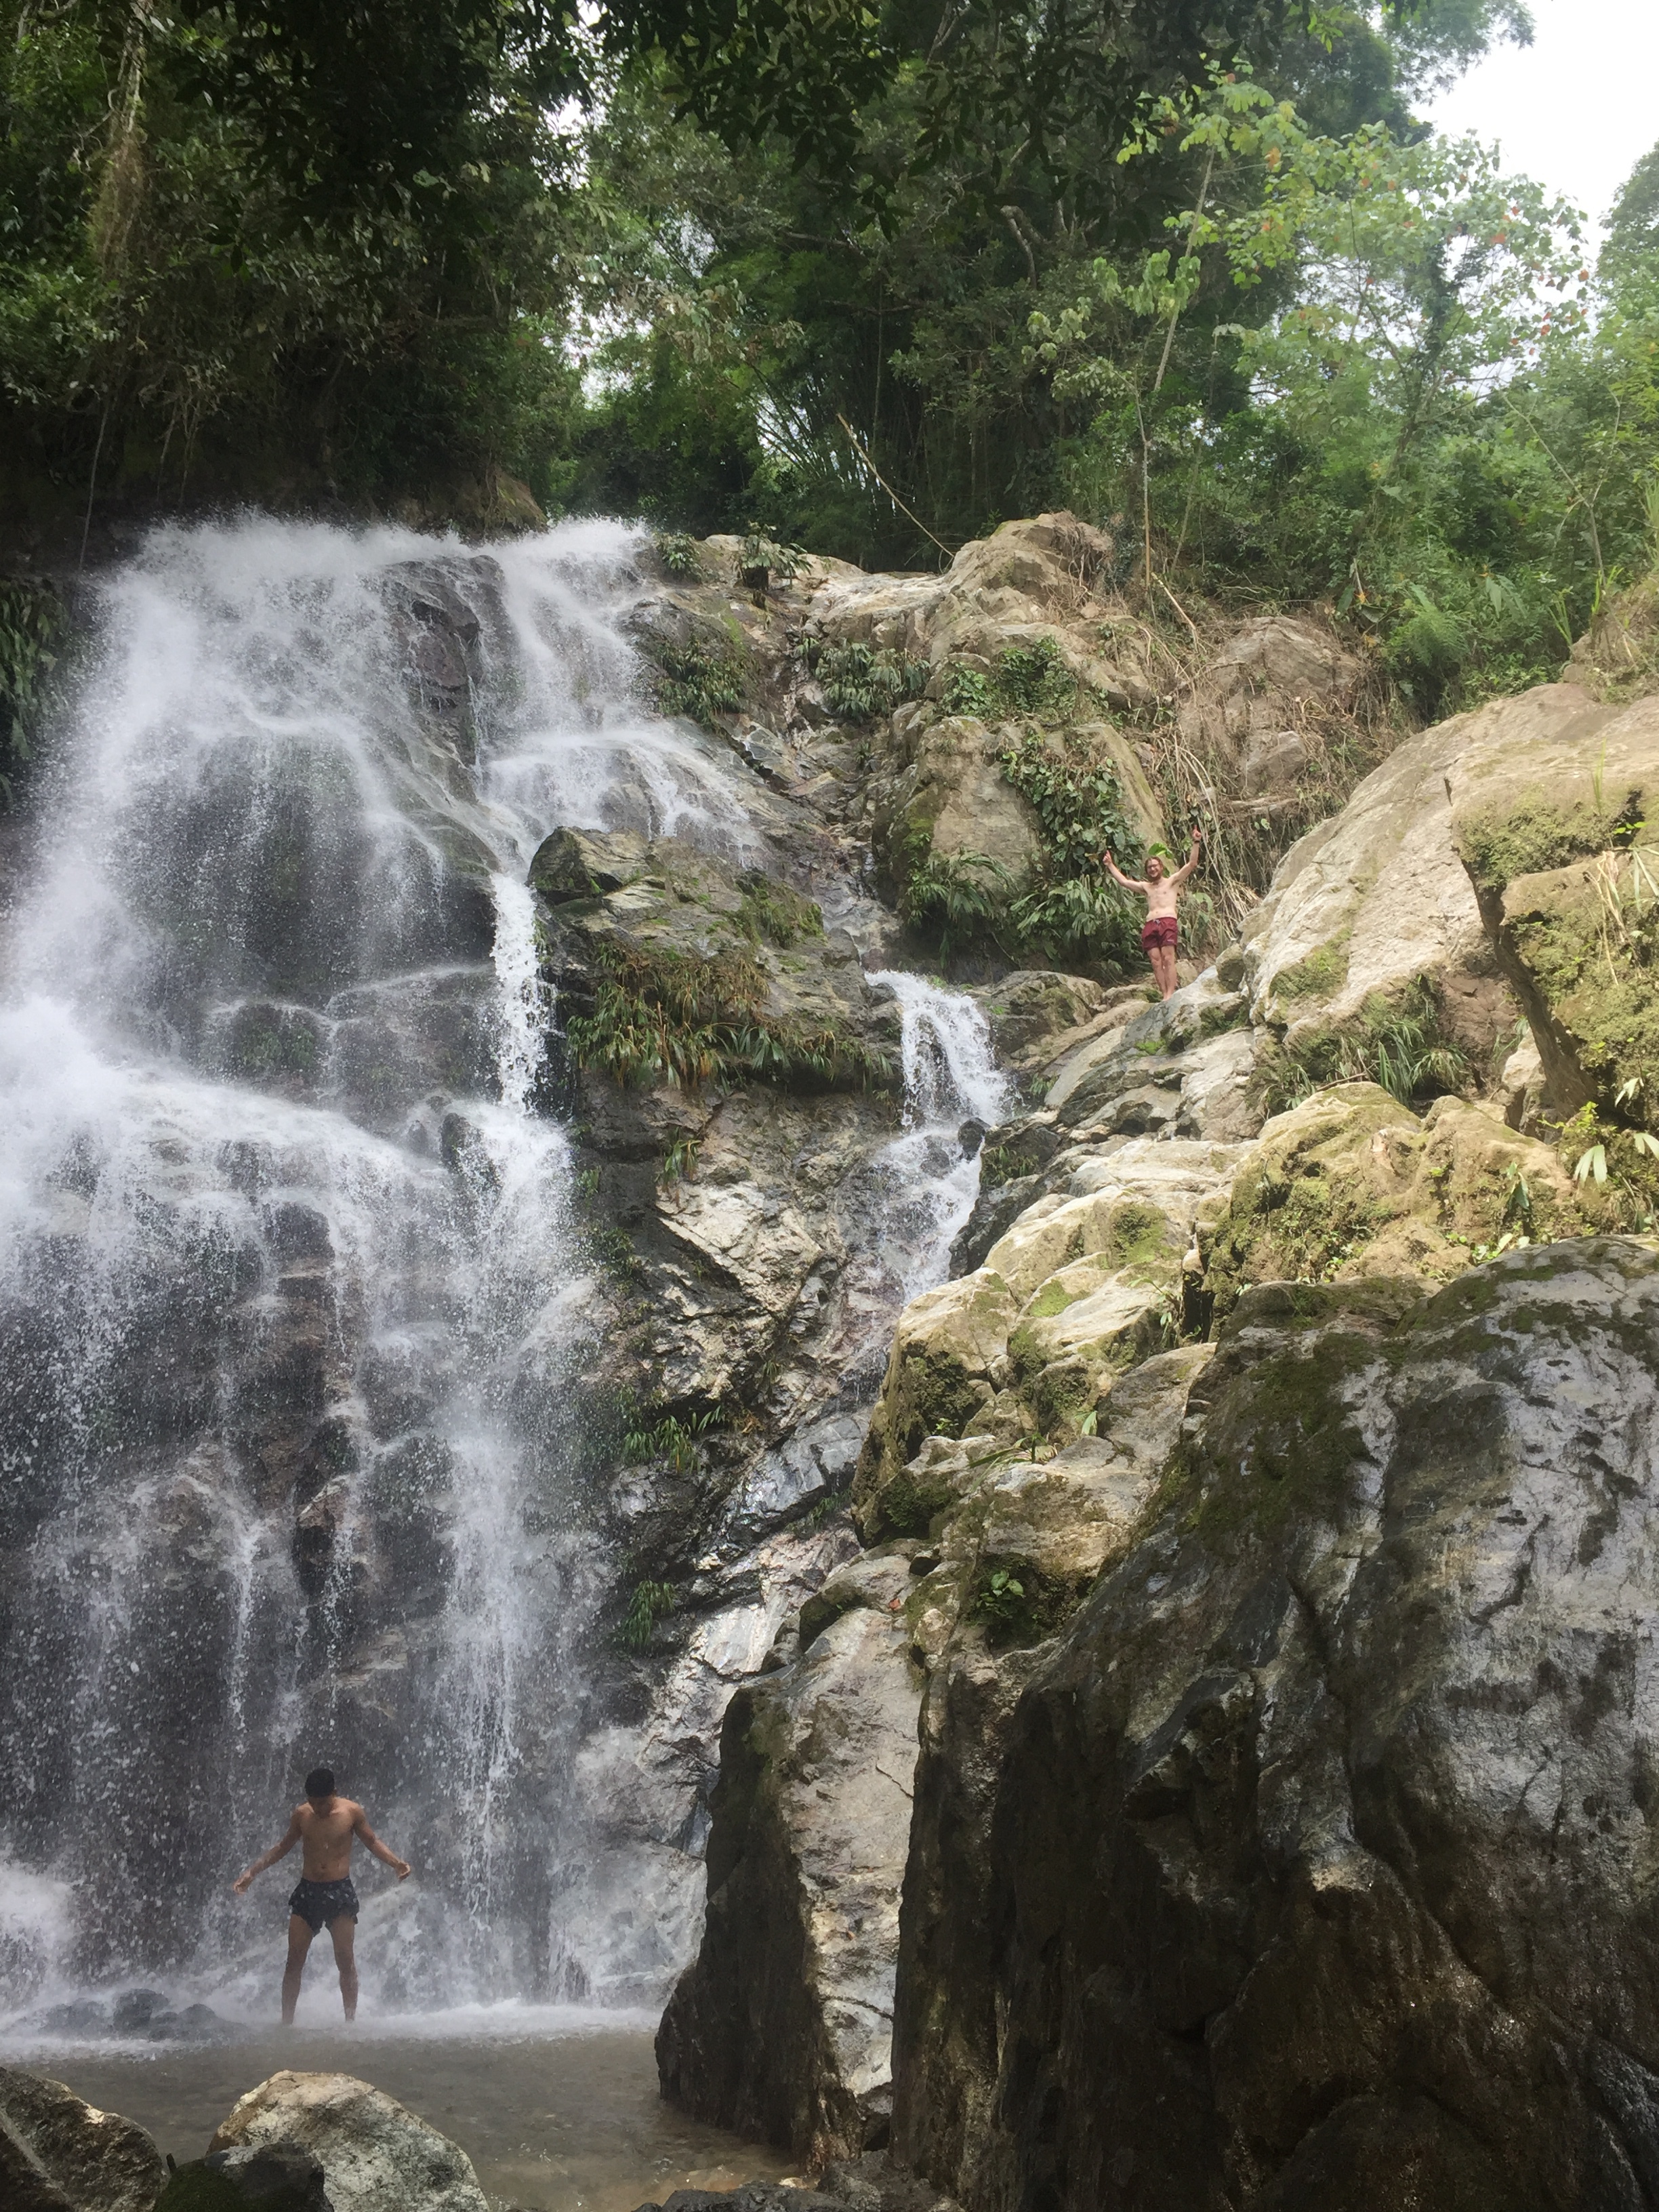   MINCA, COLOMBIA – JULY 26TH, 2017: Bertie cools off and enjoys the view high above Cascada Marinca, several miles from the town of Minca.  